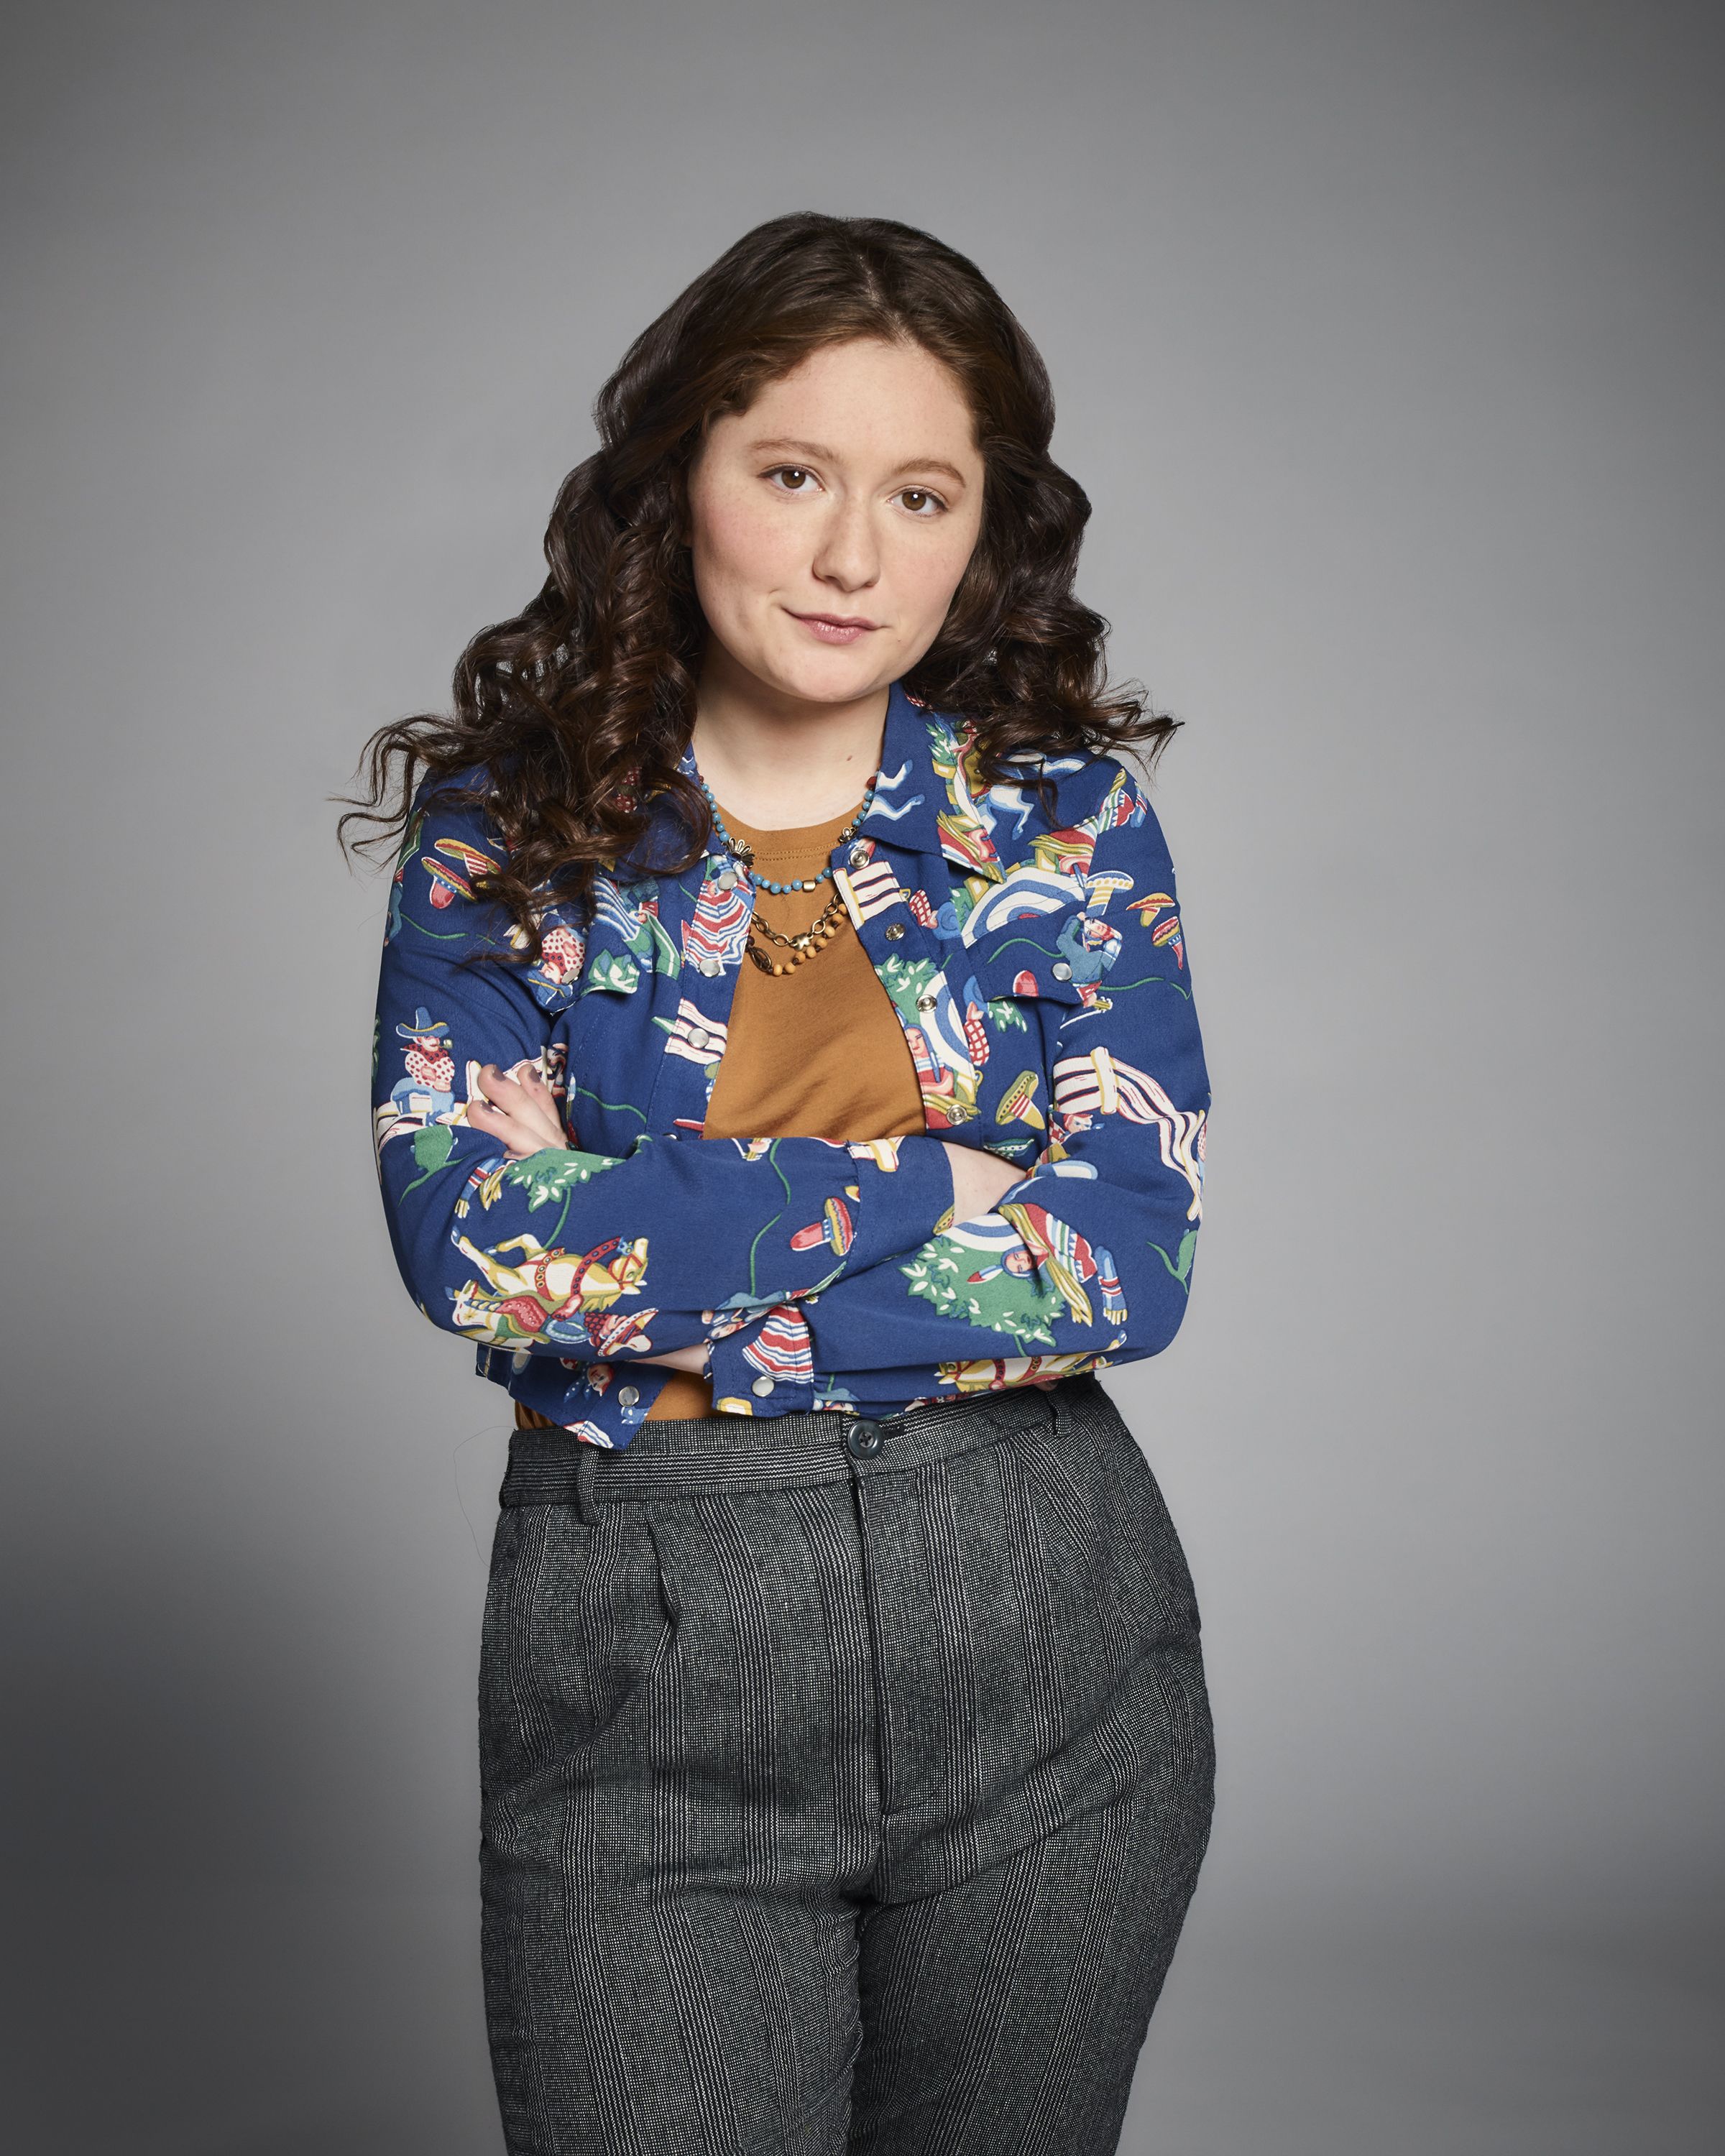 Pictures of emma kenney